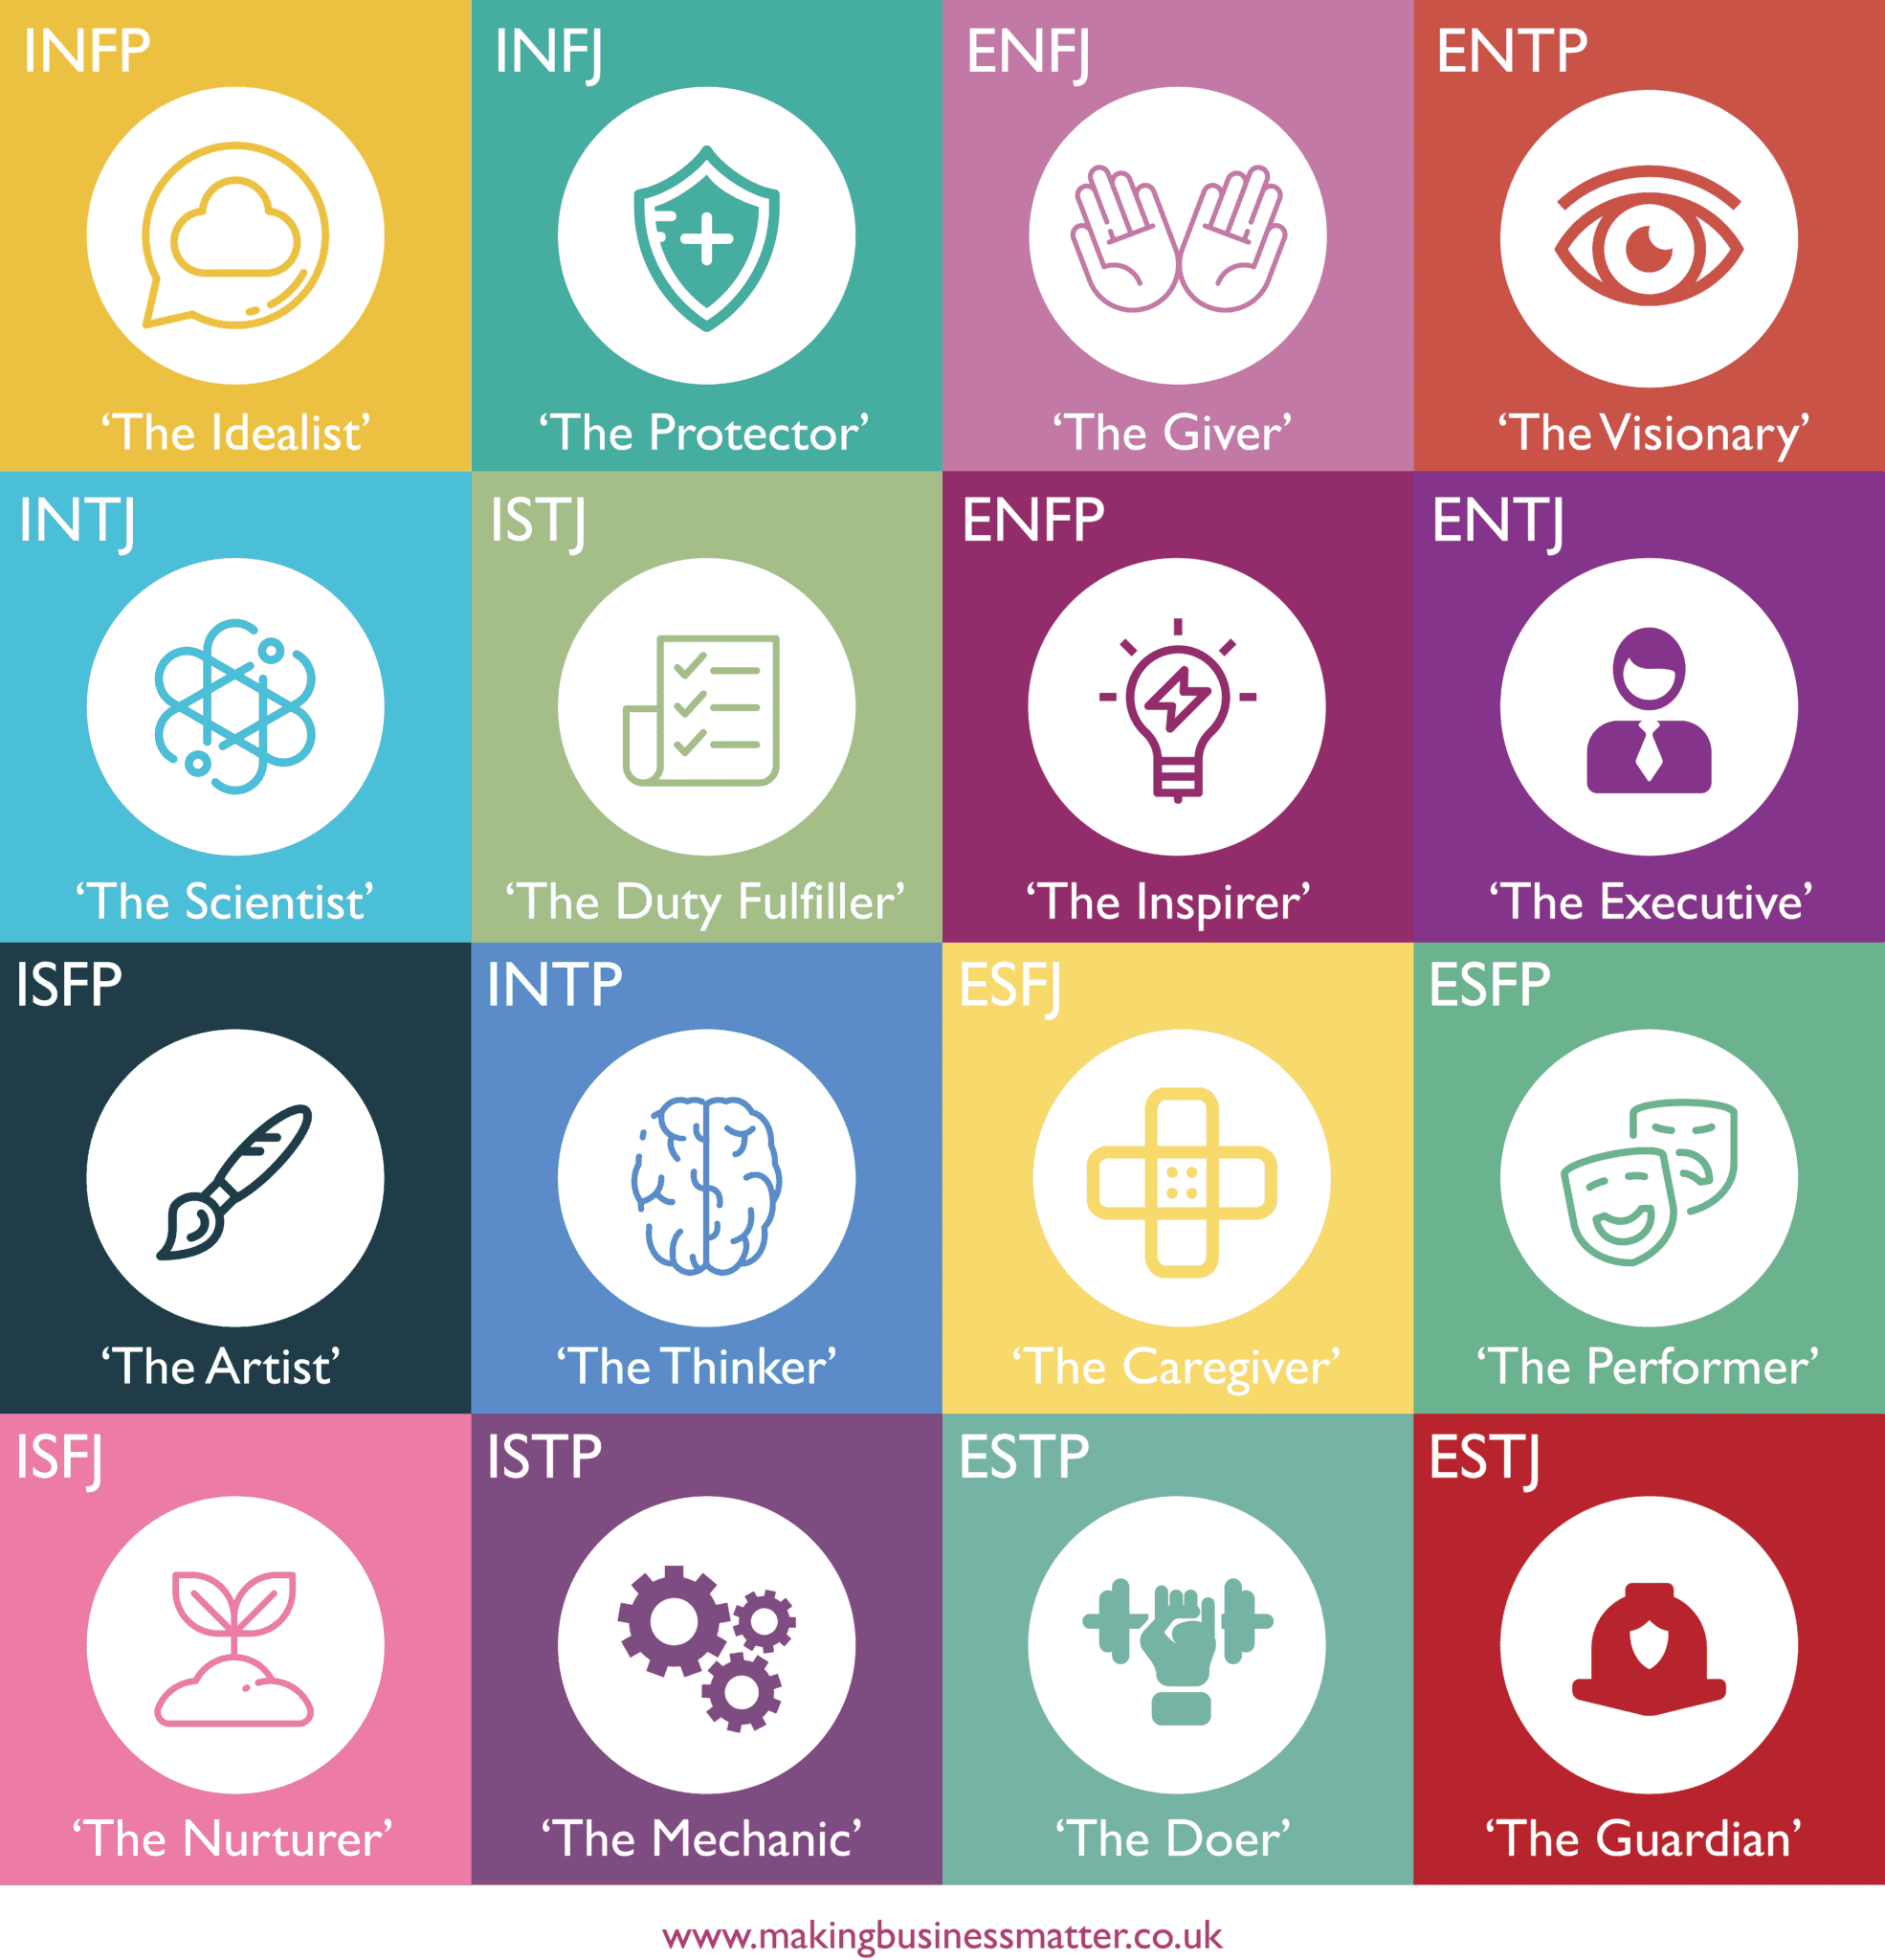 MBM infographic showing the 16 persoanlity types with colourful icons 